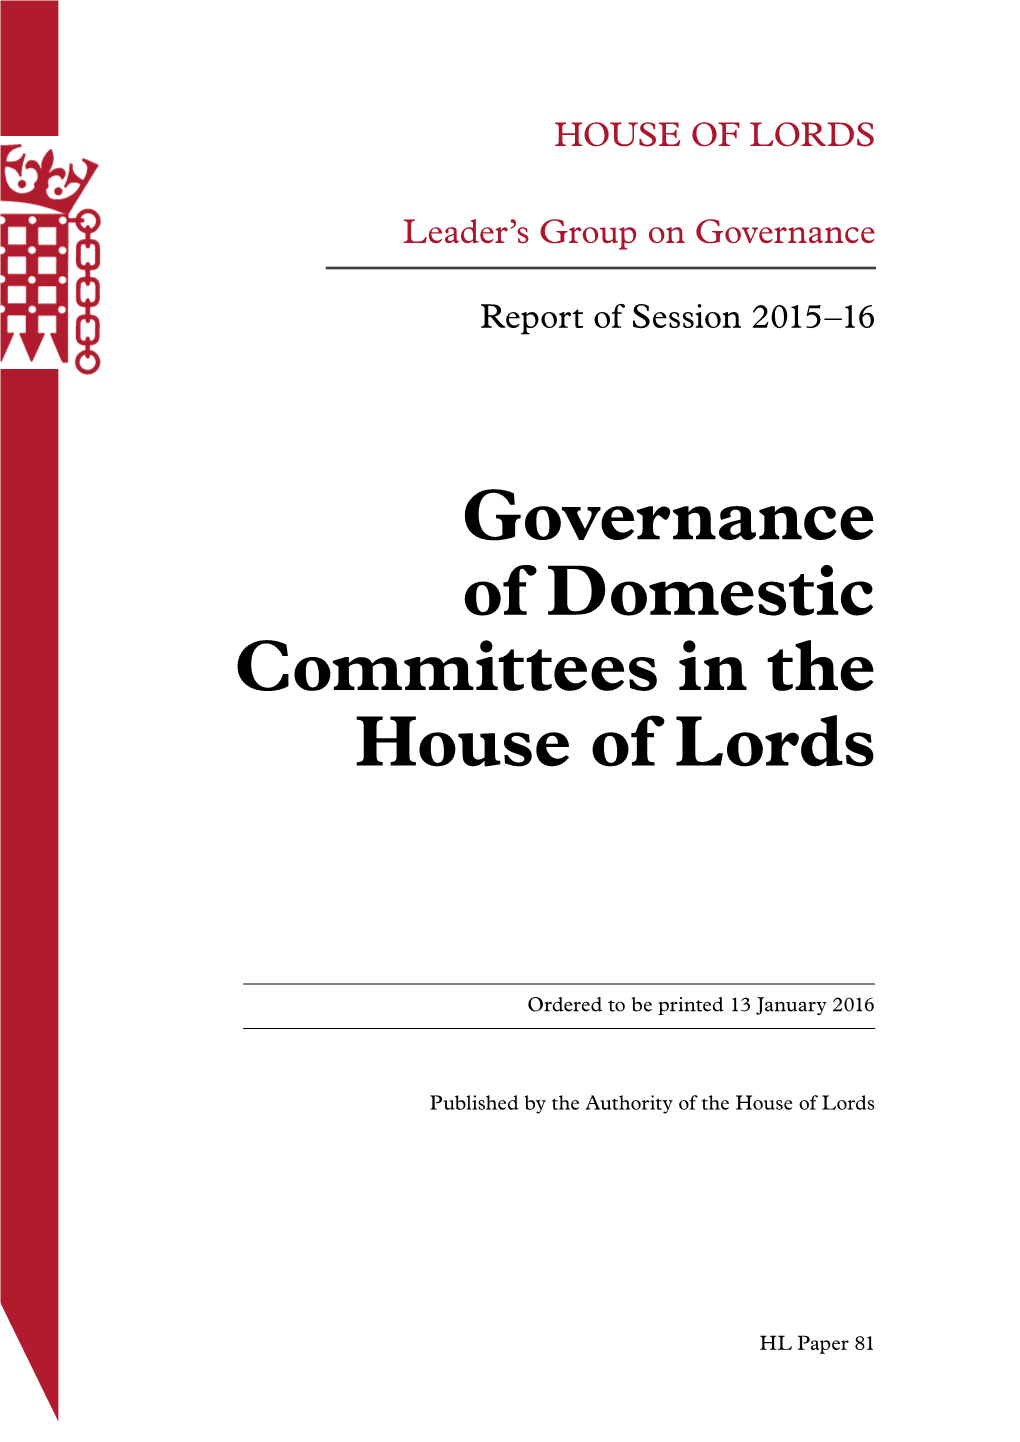 Governance of Domestic Committees in the House of Lords